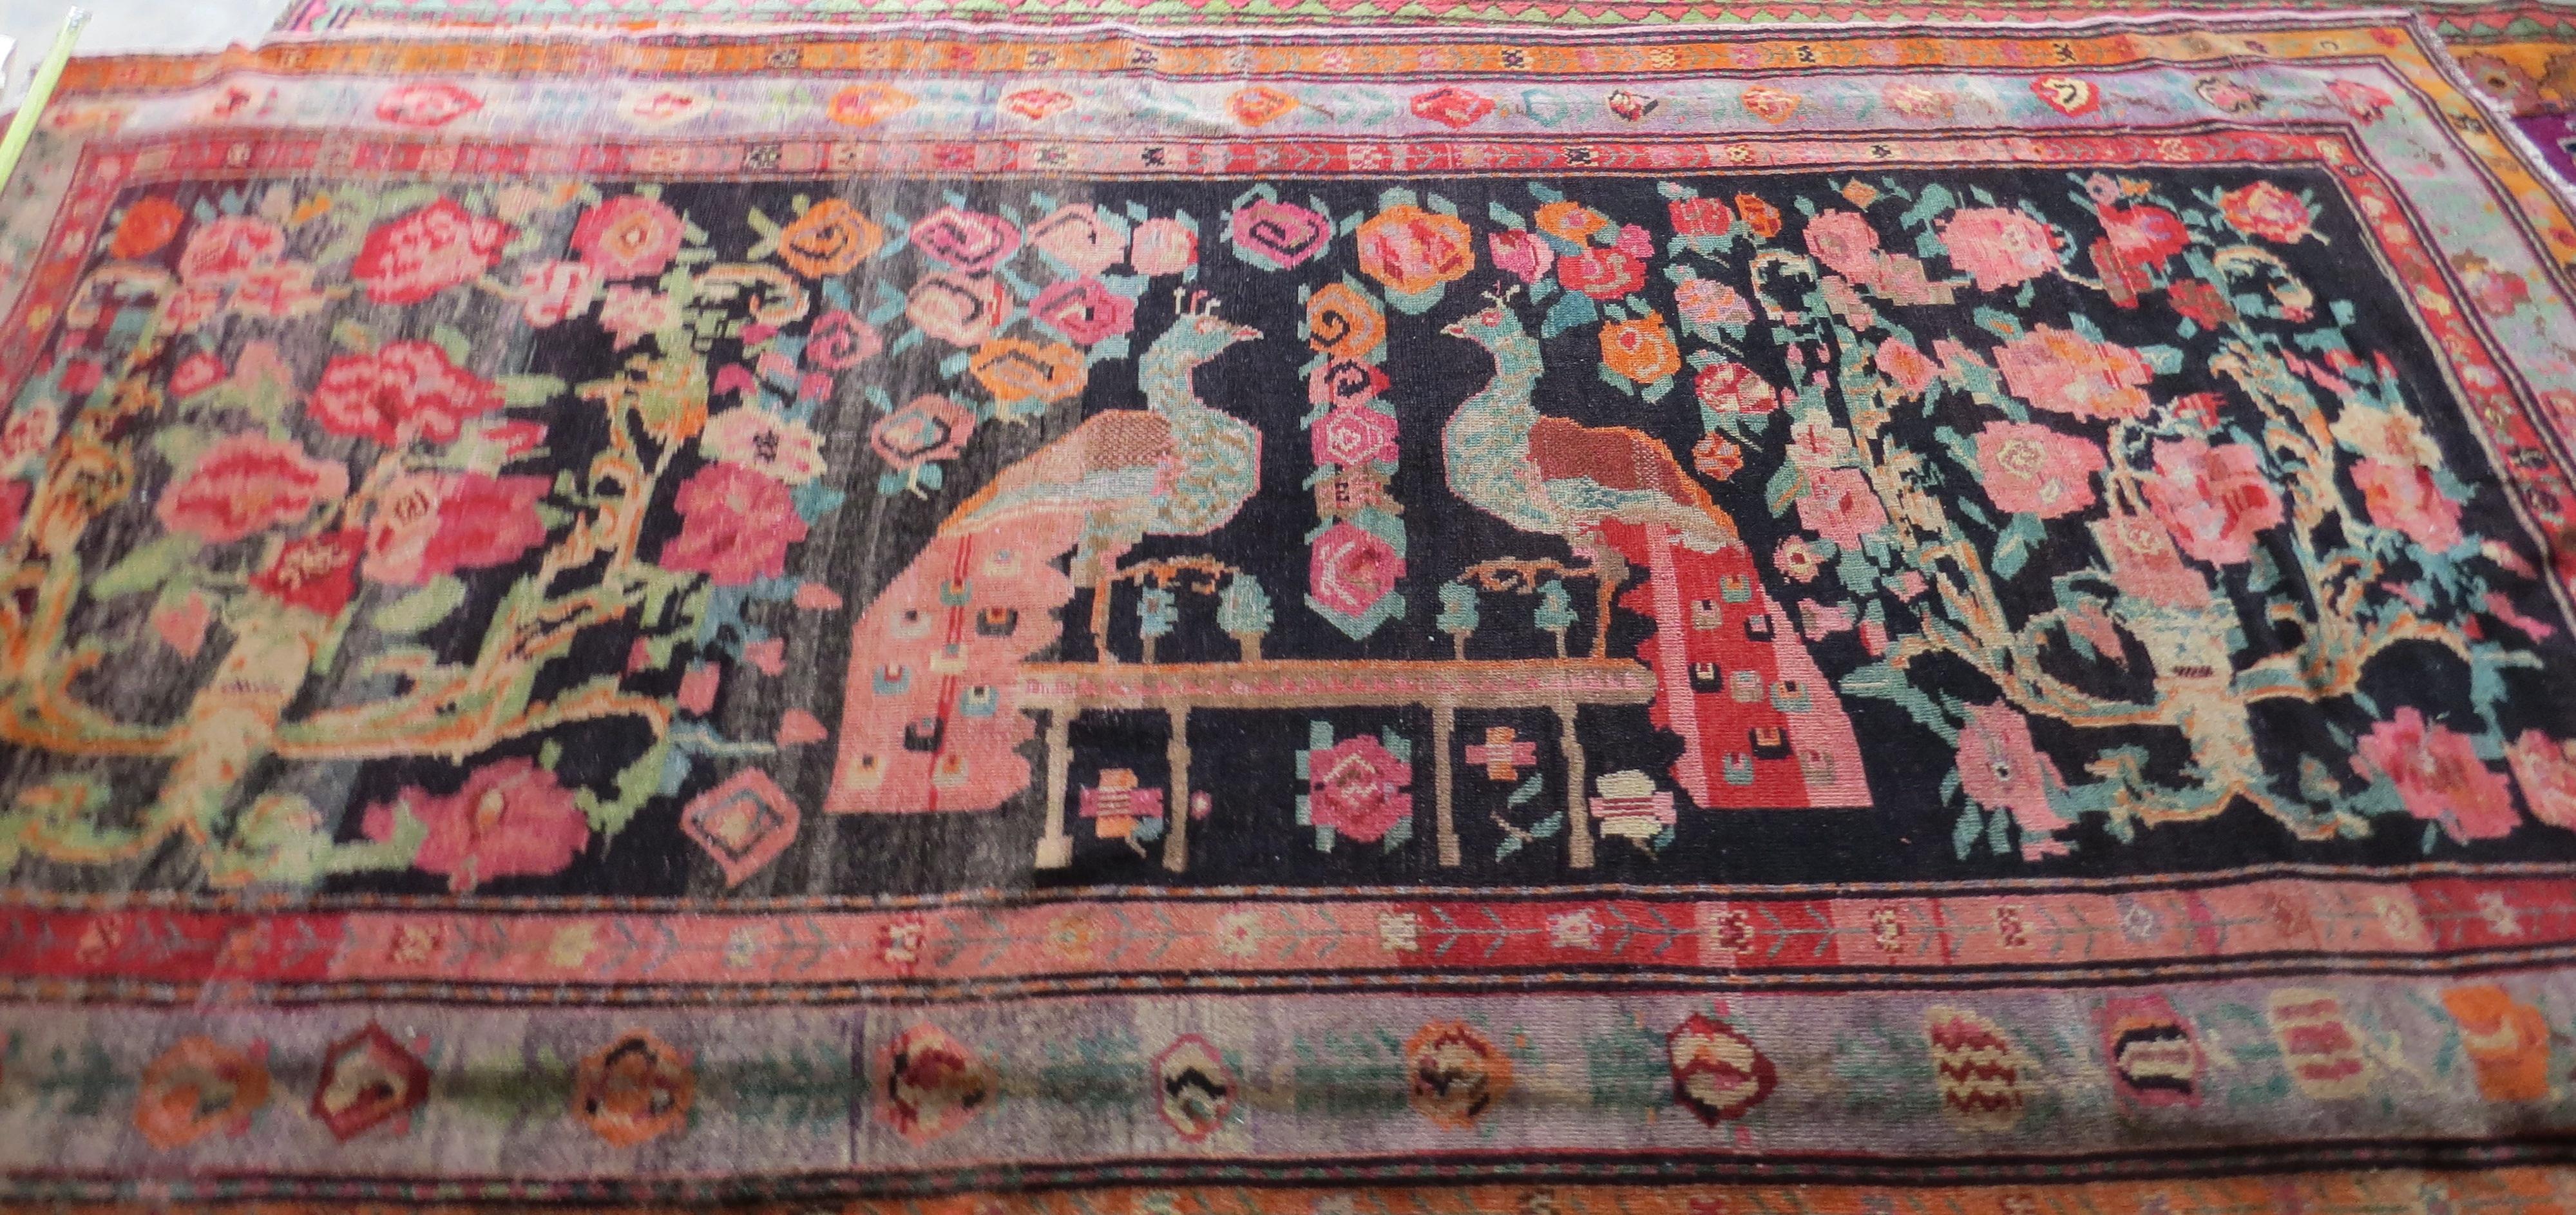 This hand knotted wool antique Caucasian Karabakh rug has an abrashed patina that comes from the many years of aging. Design. The abrashed red field displays two large scale peacocks. Rose bouquets composed of cabbage roses, peonies, floral sprigs,